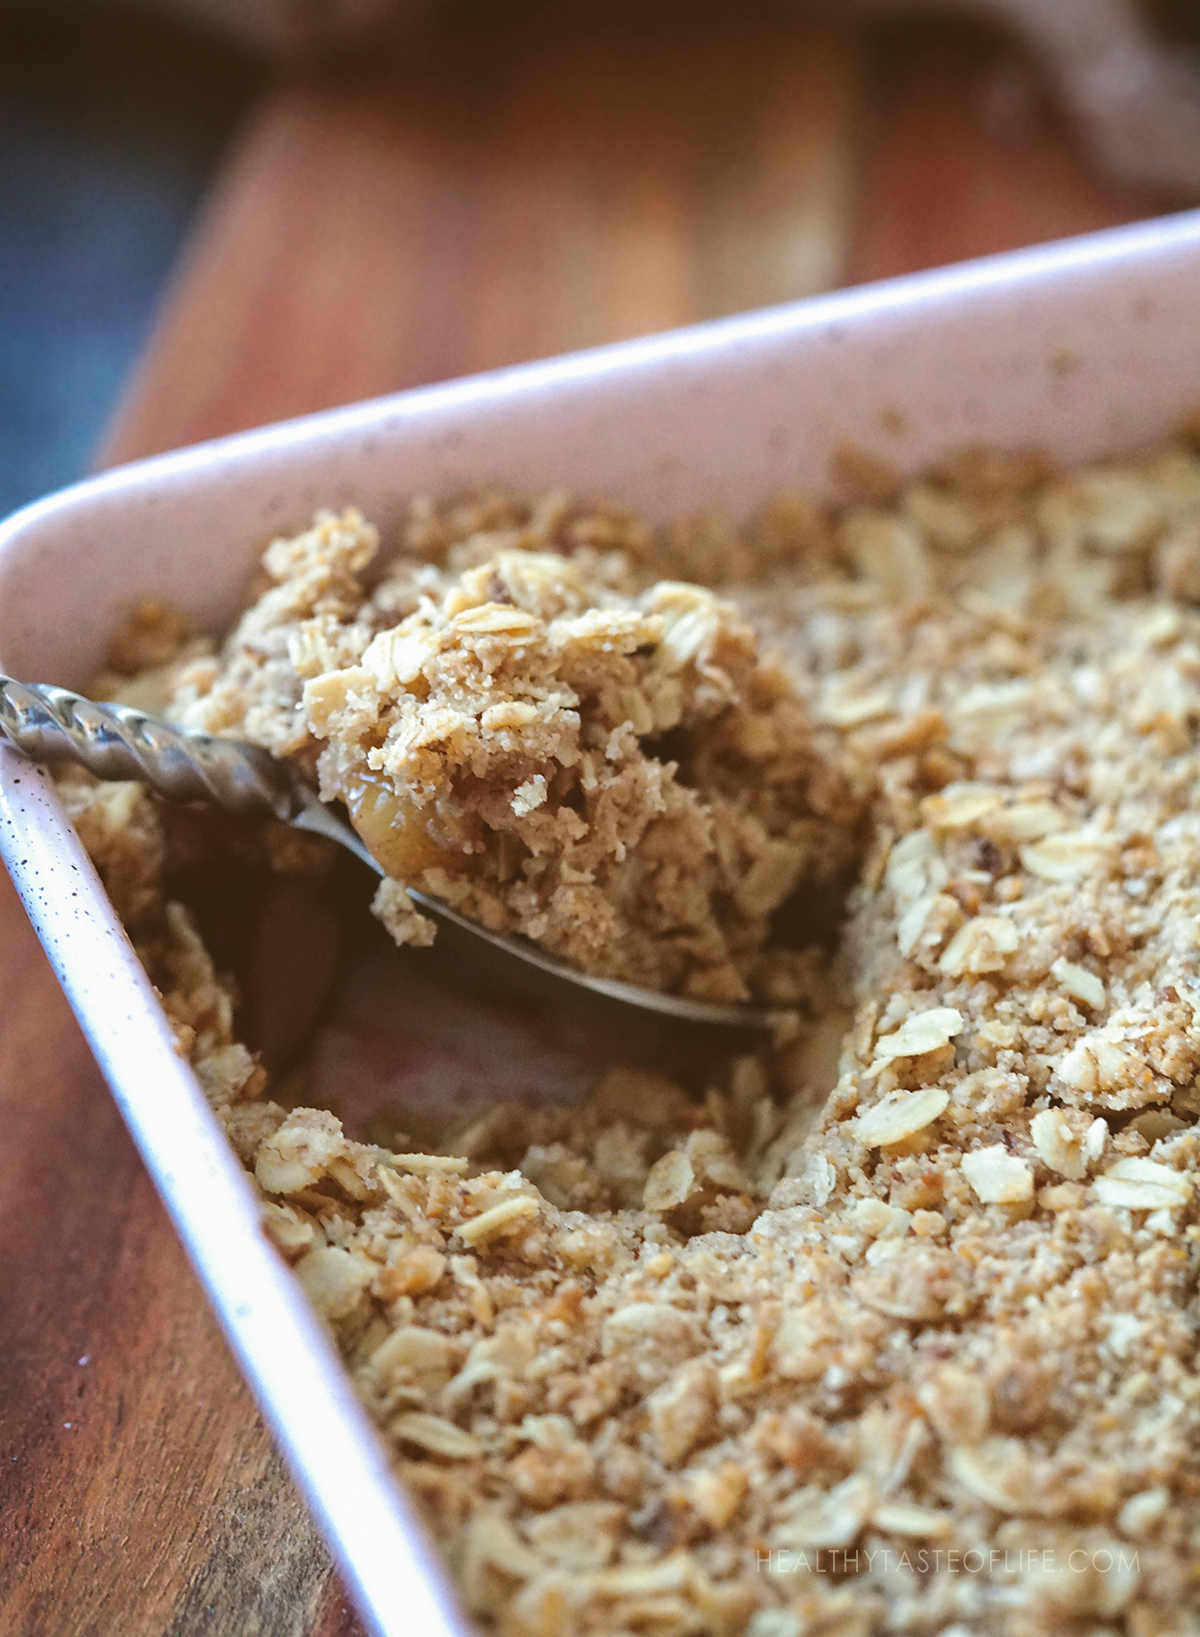 Baked oat crumble topping.